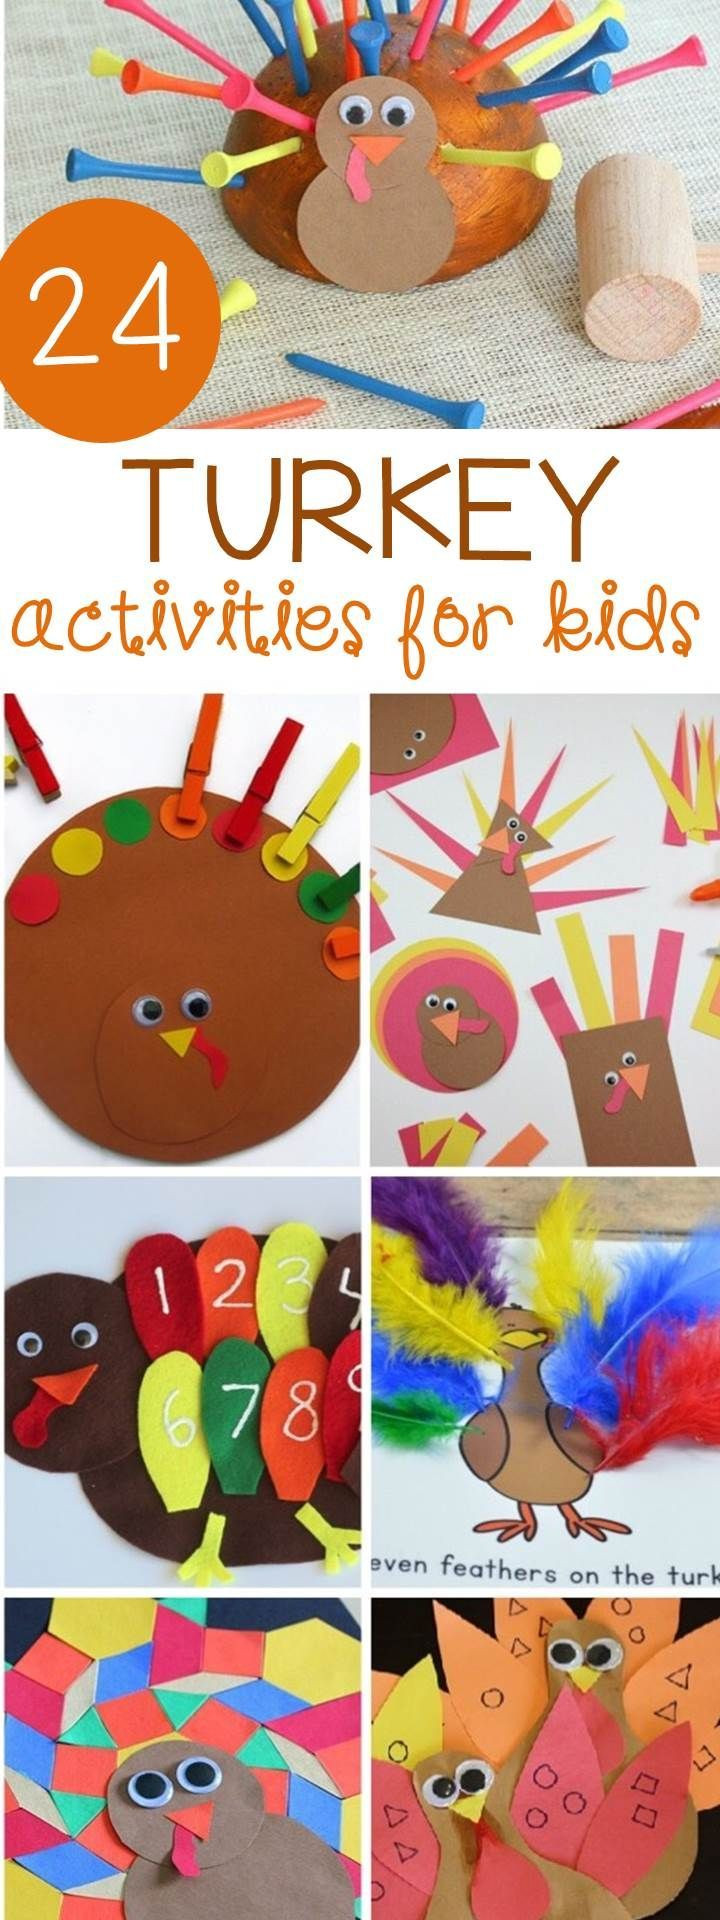 A Turkey For Thanksgiving Activities
 24 Turkey Activities for Kids